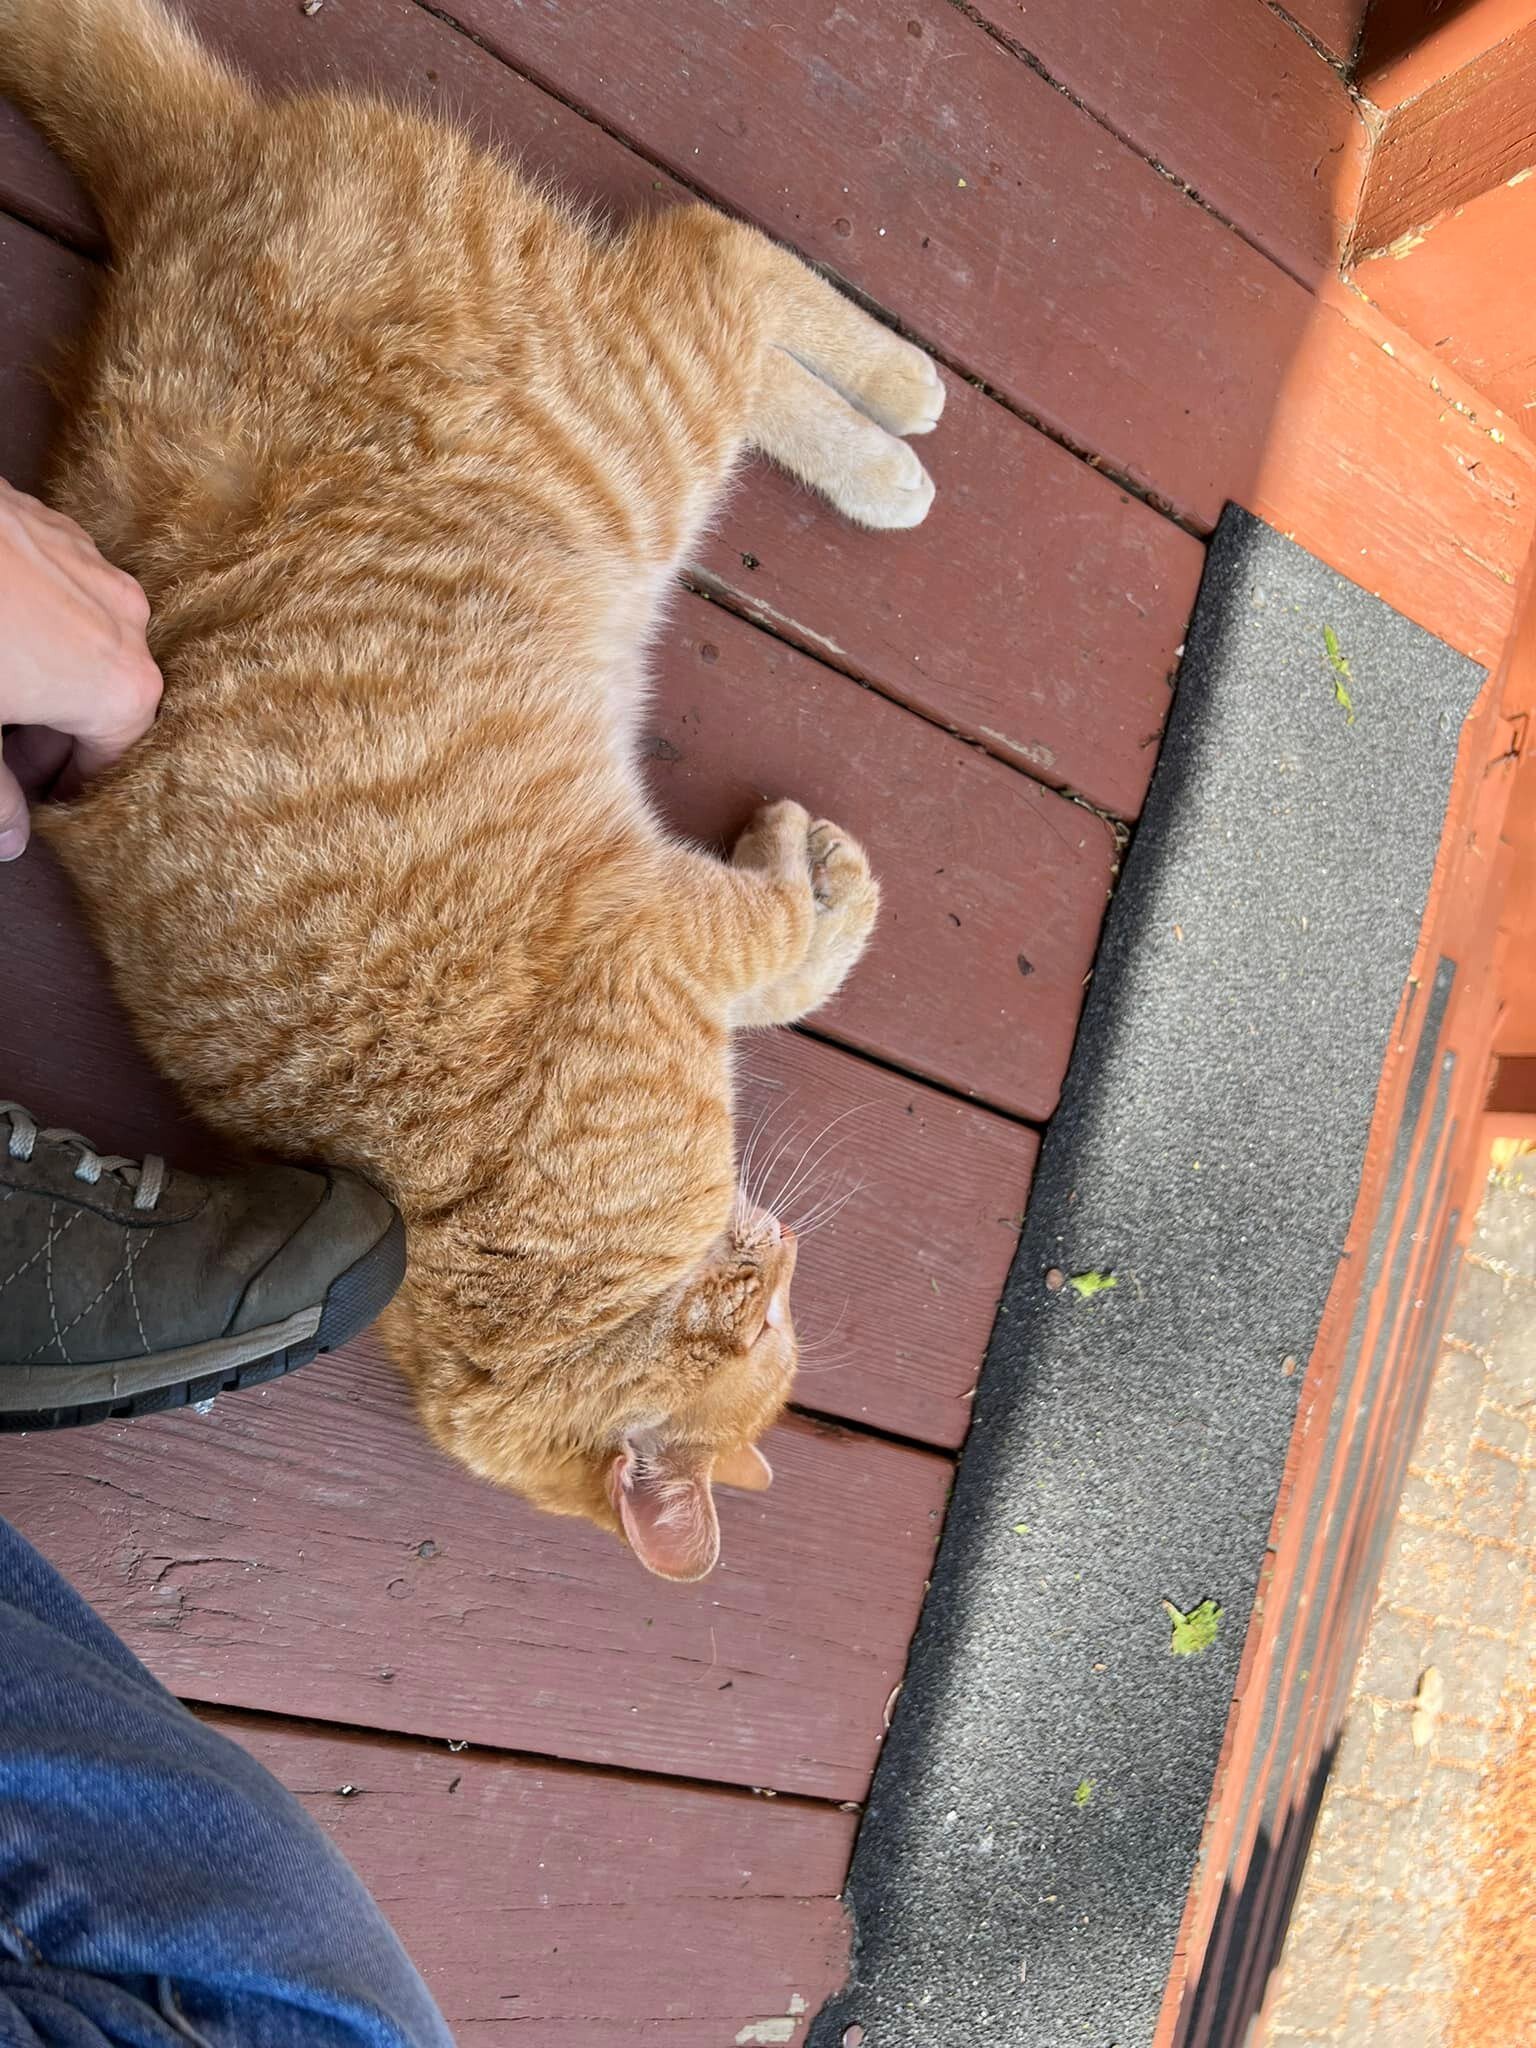 Anyone missing an orange cat. Total love bug. Good motor, likes scritches and belly rubs. No biscuits observed. Skin and bones. We can&rsquo;t take in another one.